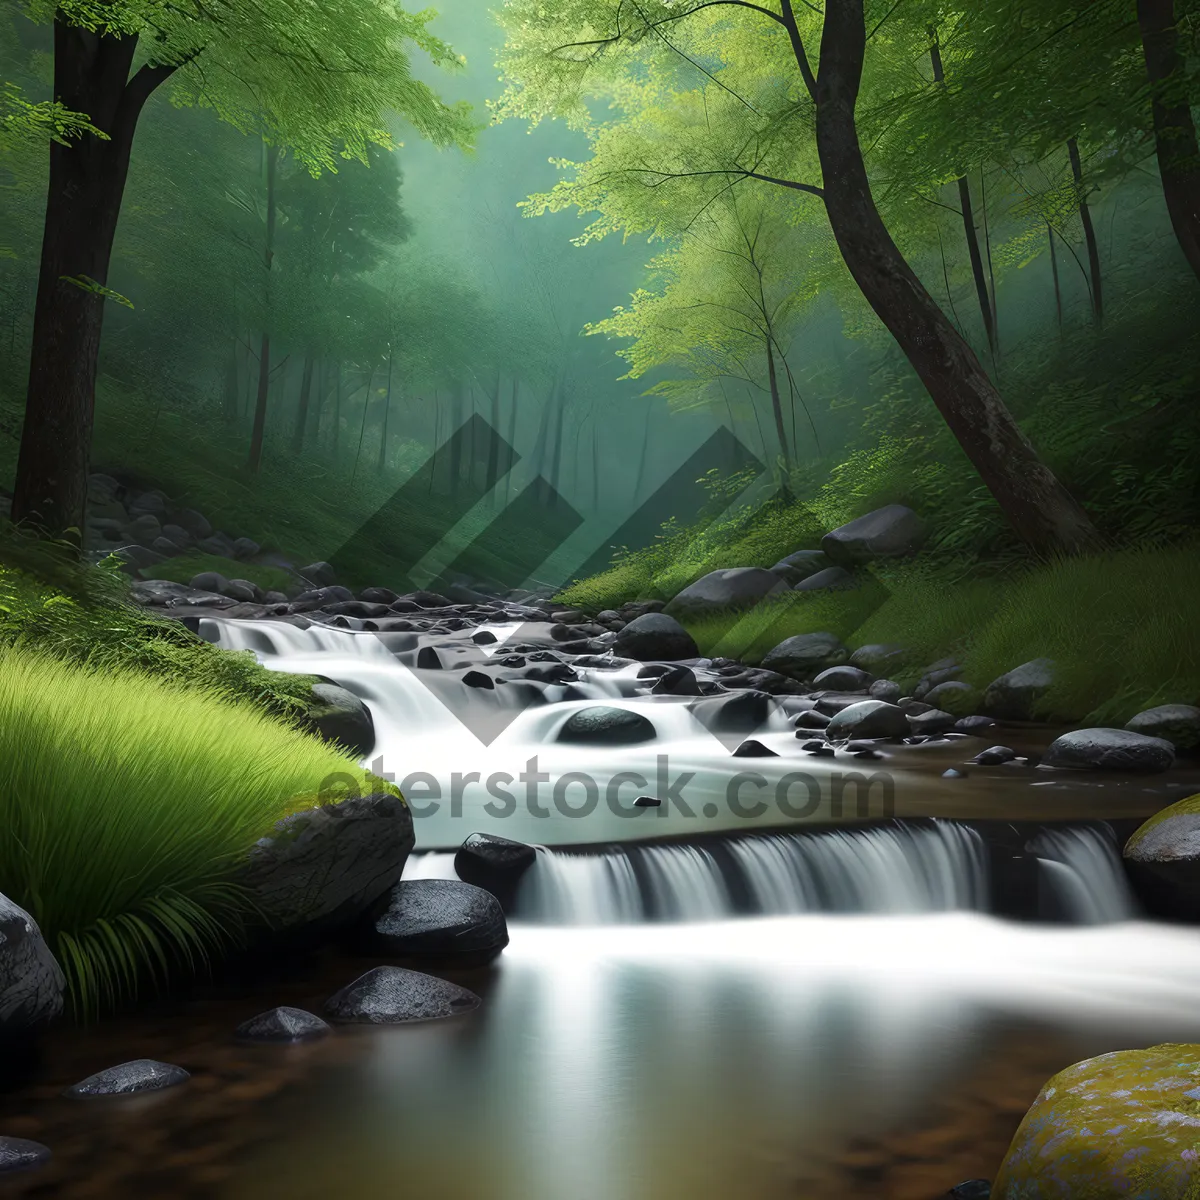 Picture of Serene River Flow amidst Lush Forest Landscape